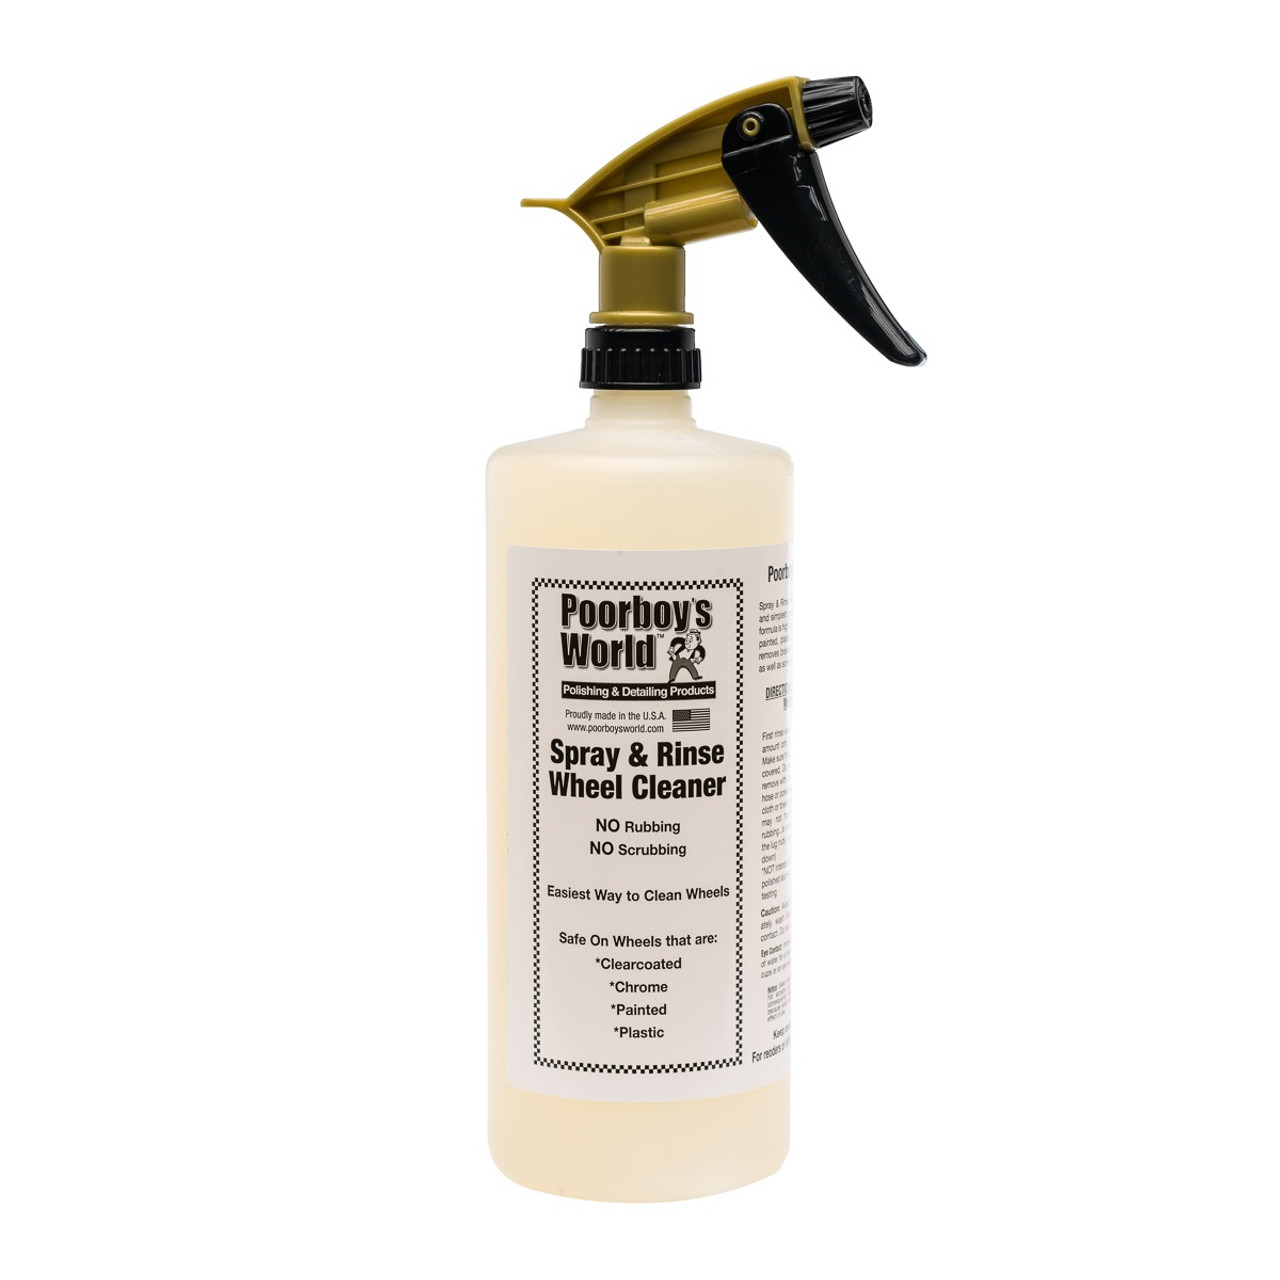 Poorboys World Spray and Rinse Wheel Cleaner 32 oz